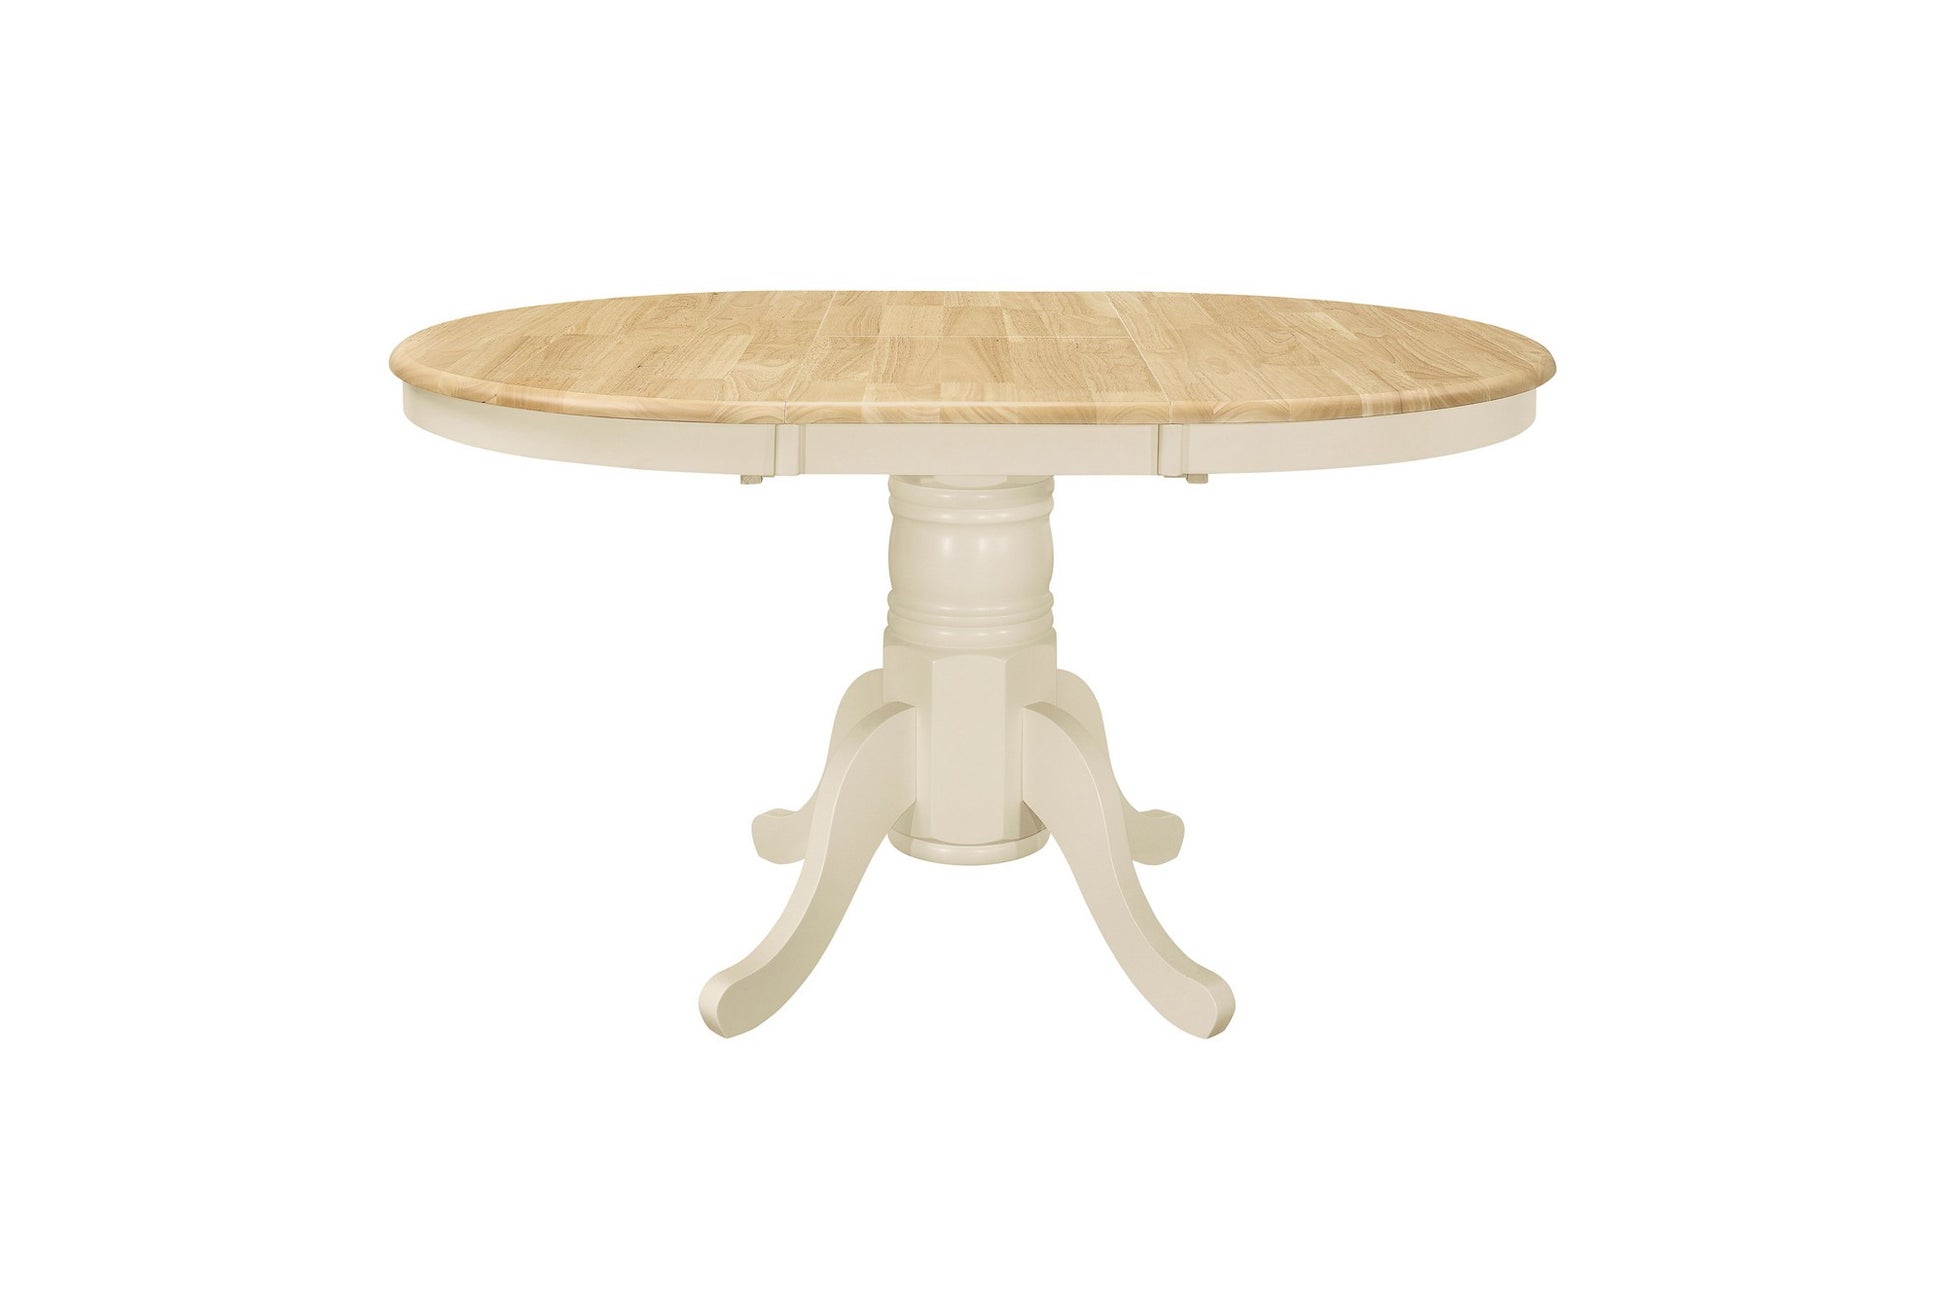 Chatsworth Classic Farmhouse Round Extending Dining Table with 4 Chairs, Easy to Use